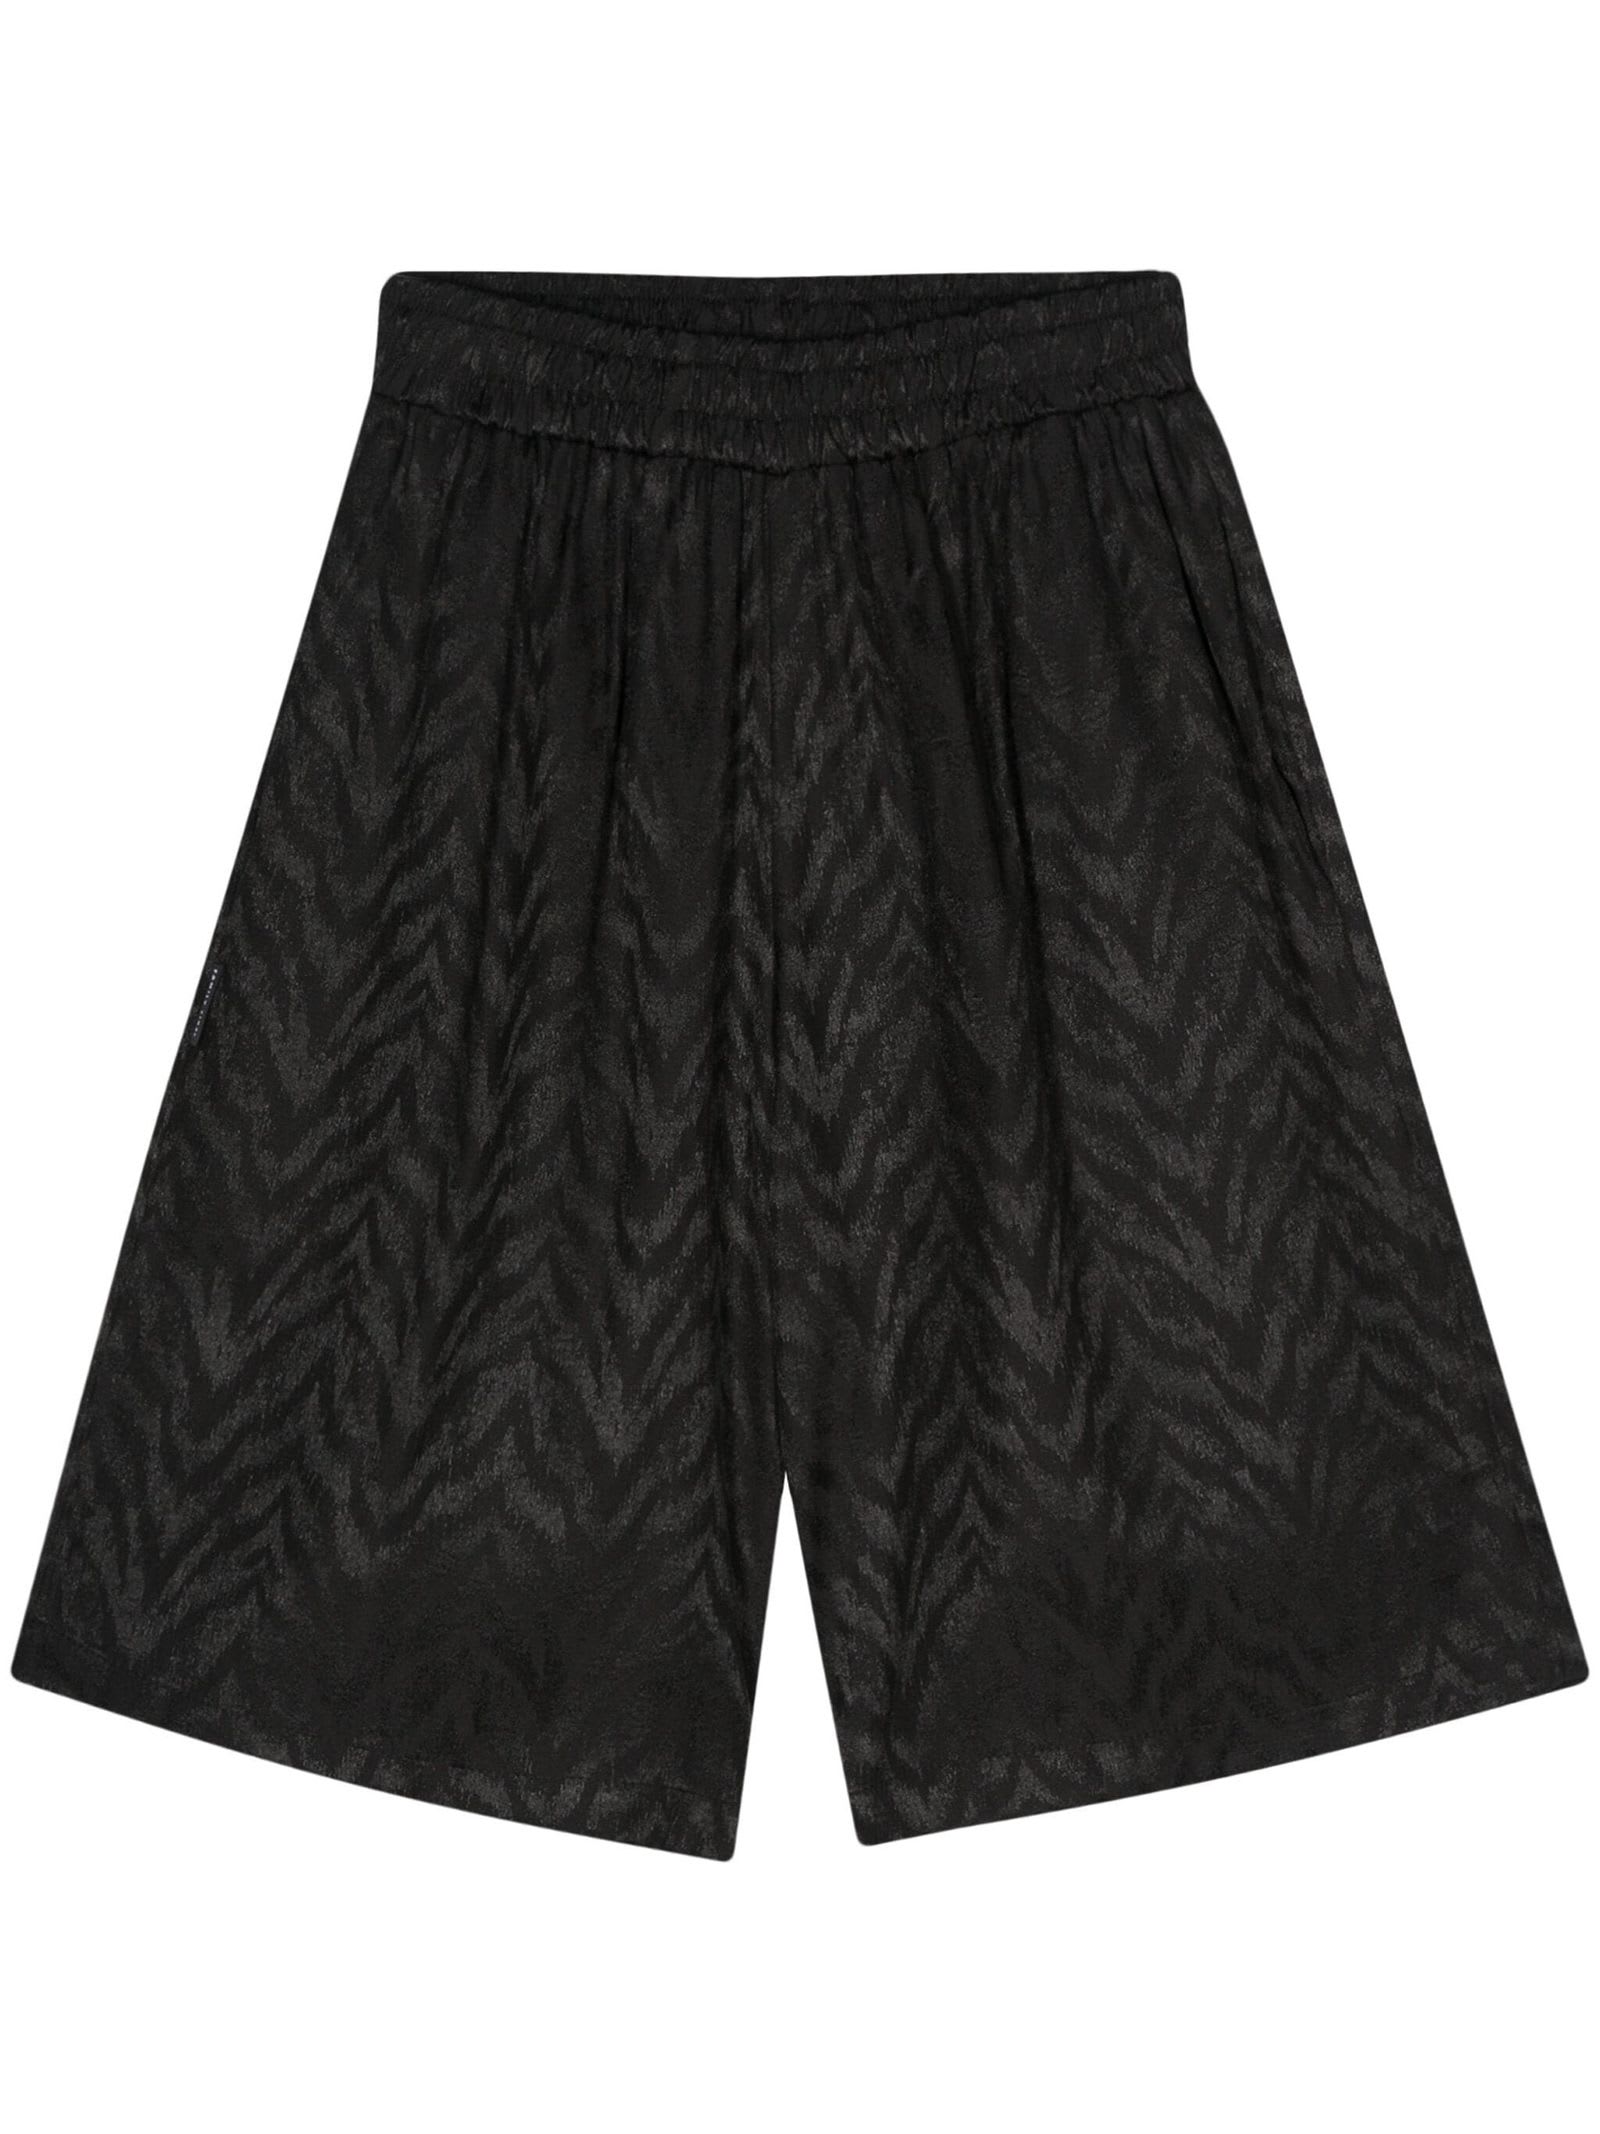 Shop Family First Milano Family First Shorts Black